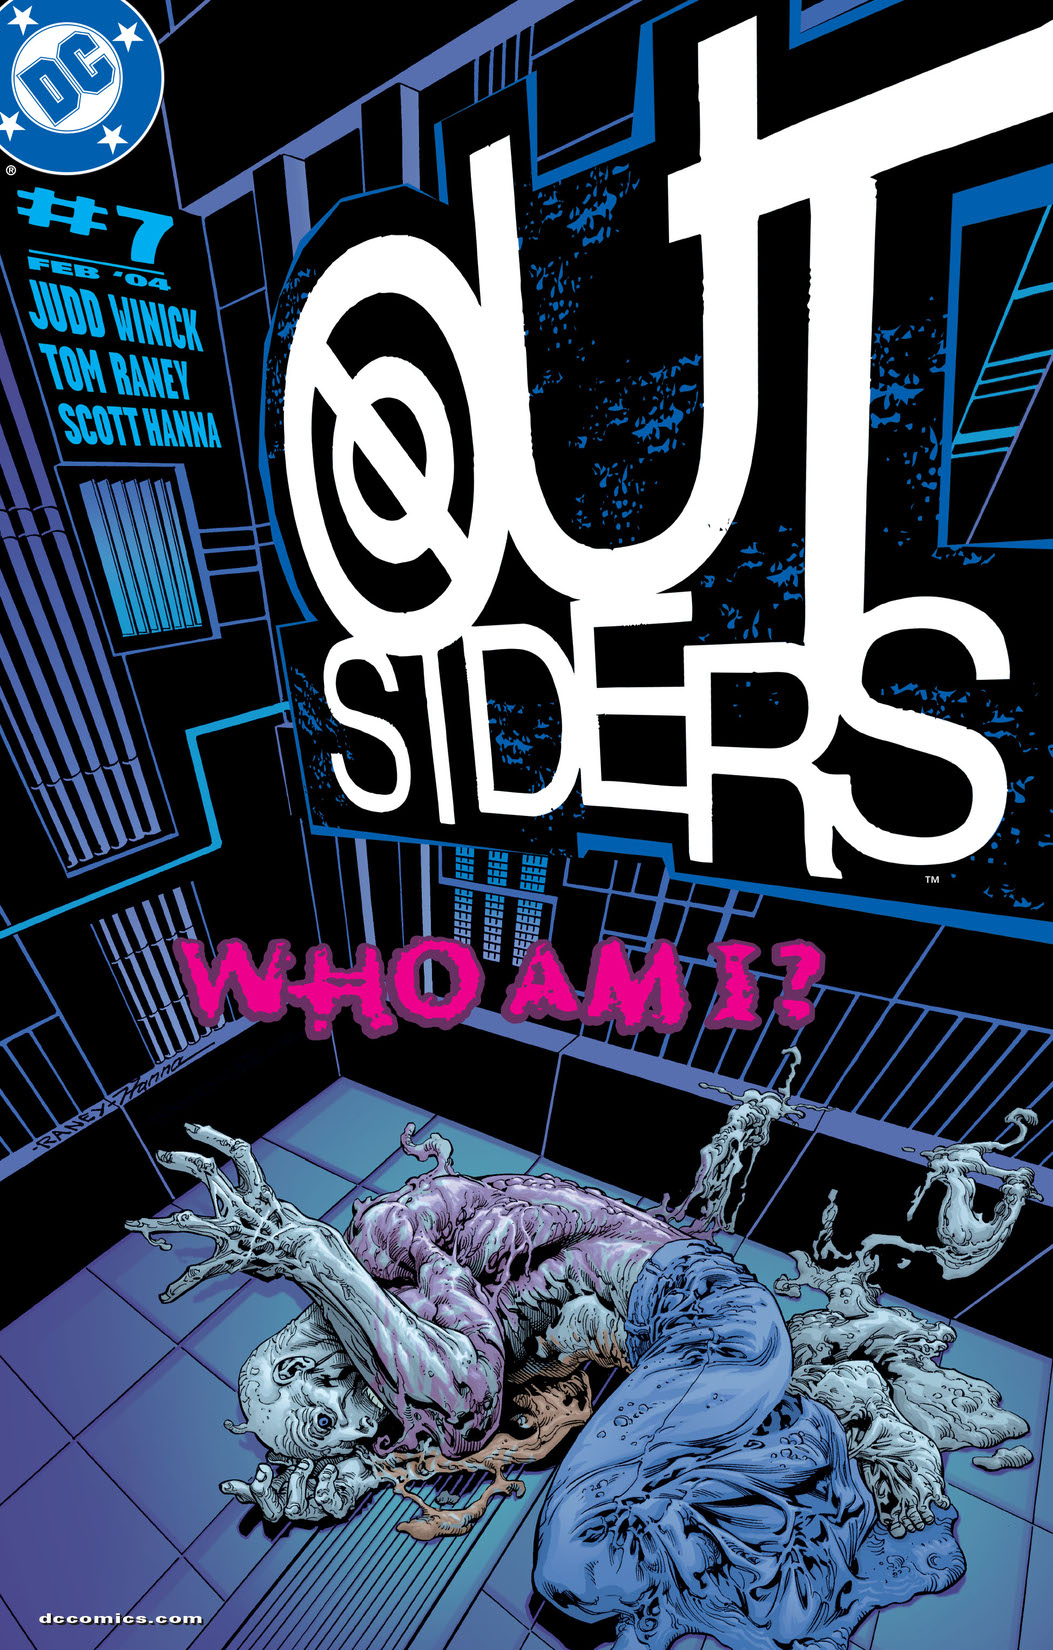 Outsiders (2003-) #7 preview images